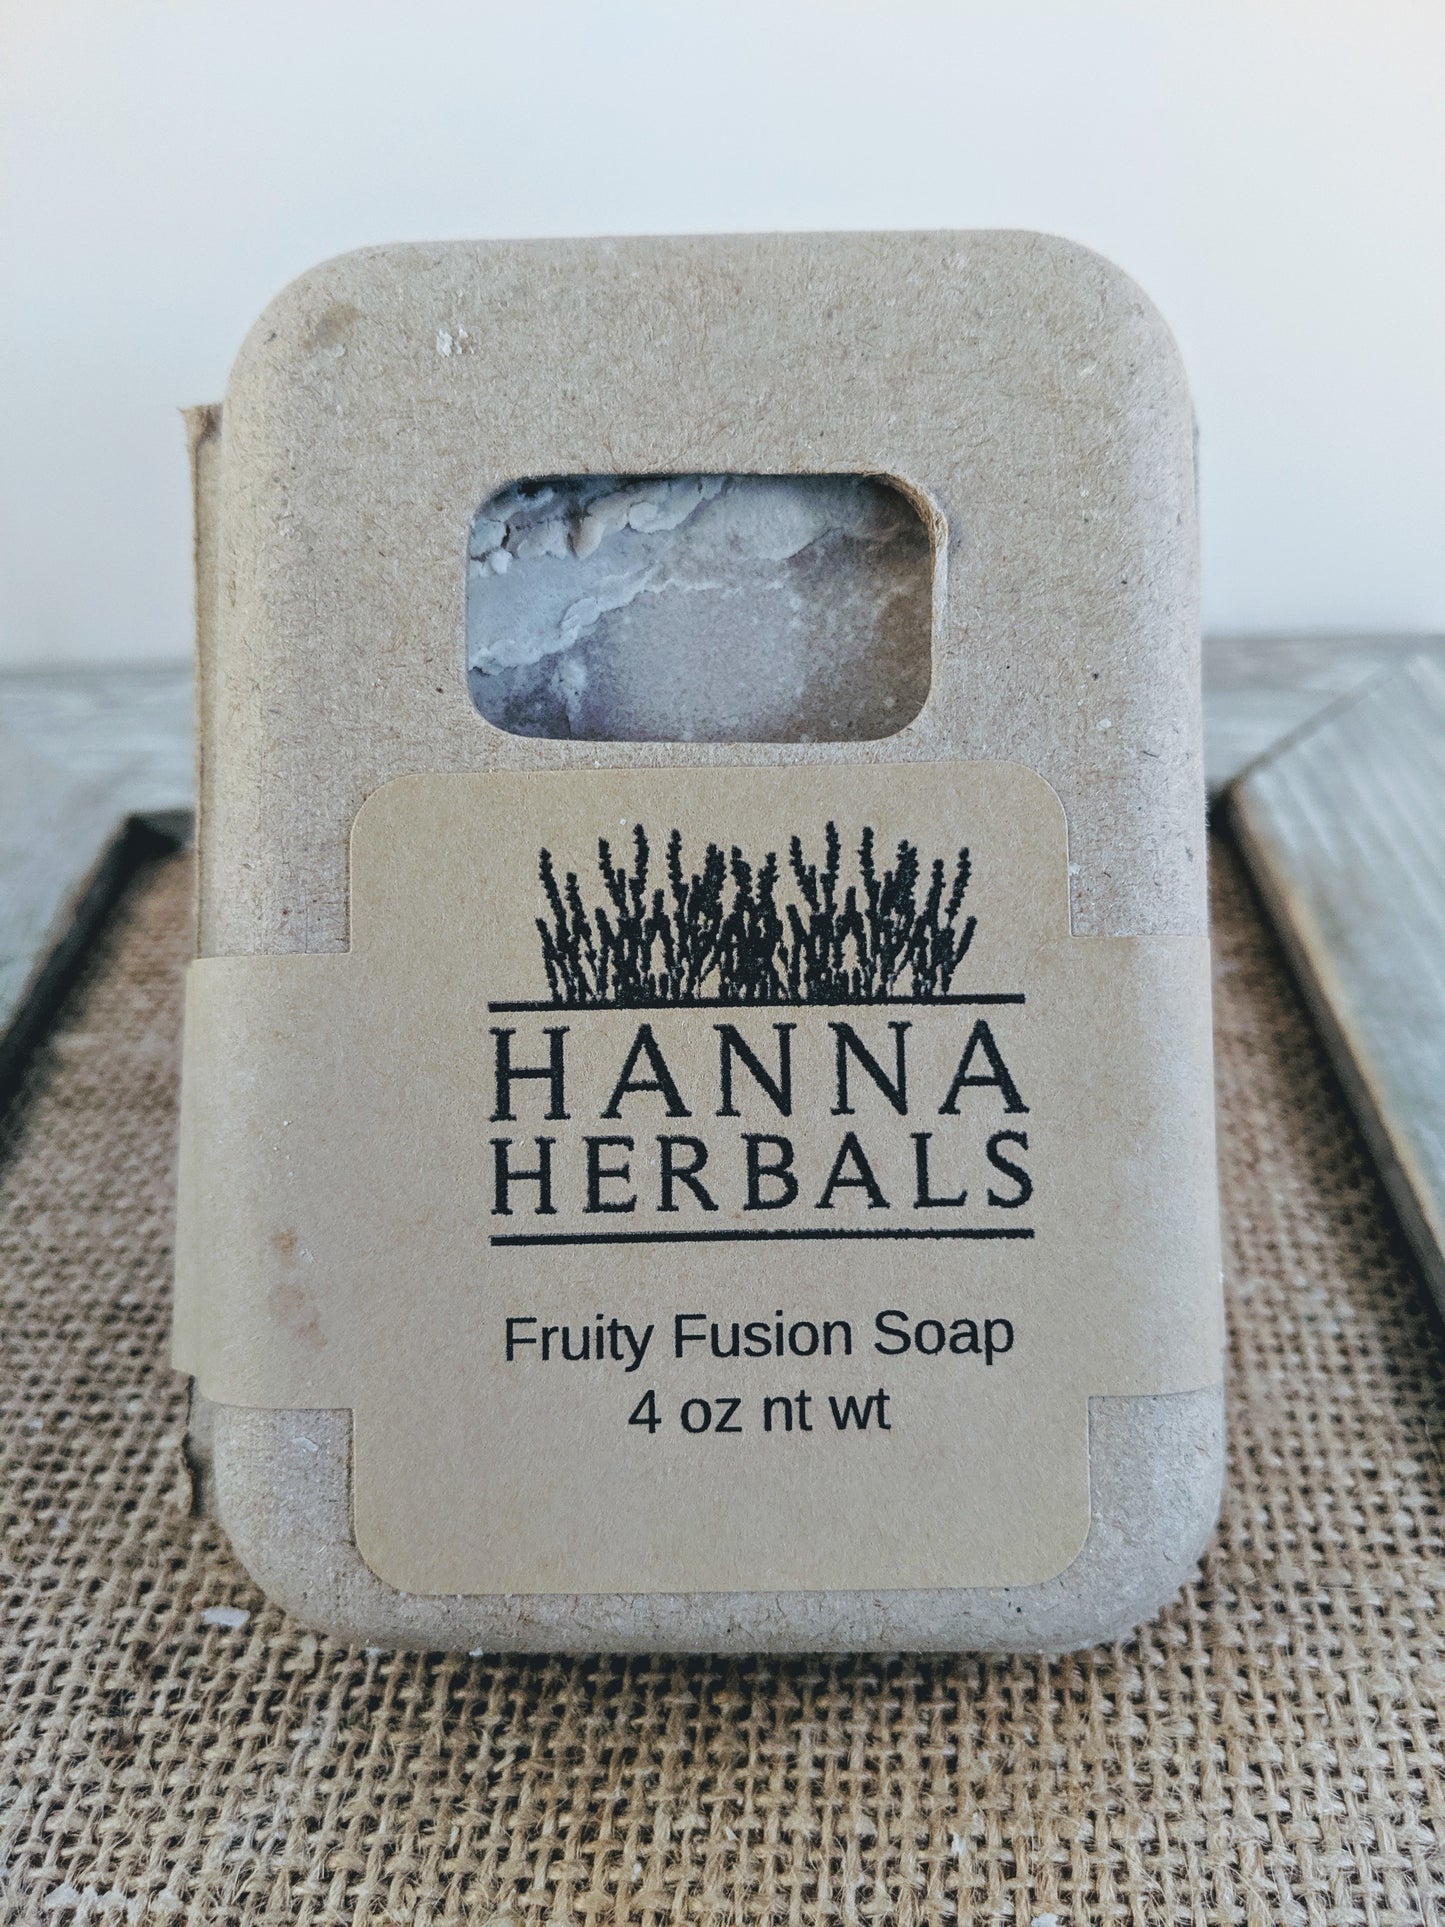 Fruity Fusion with Mica swirls - Hanna Herbals